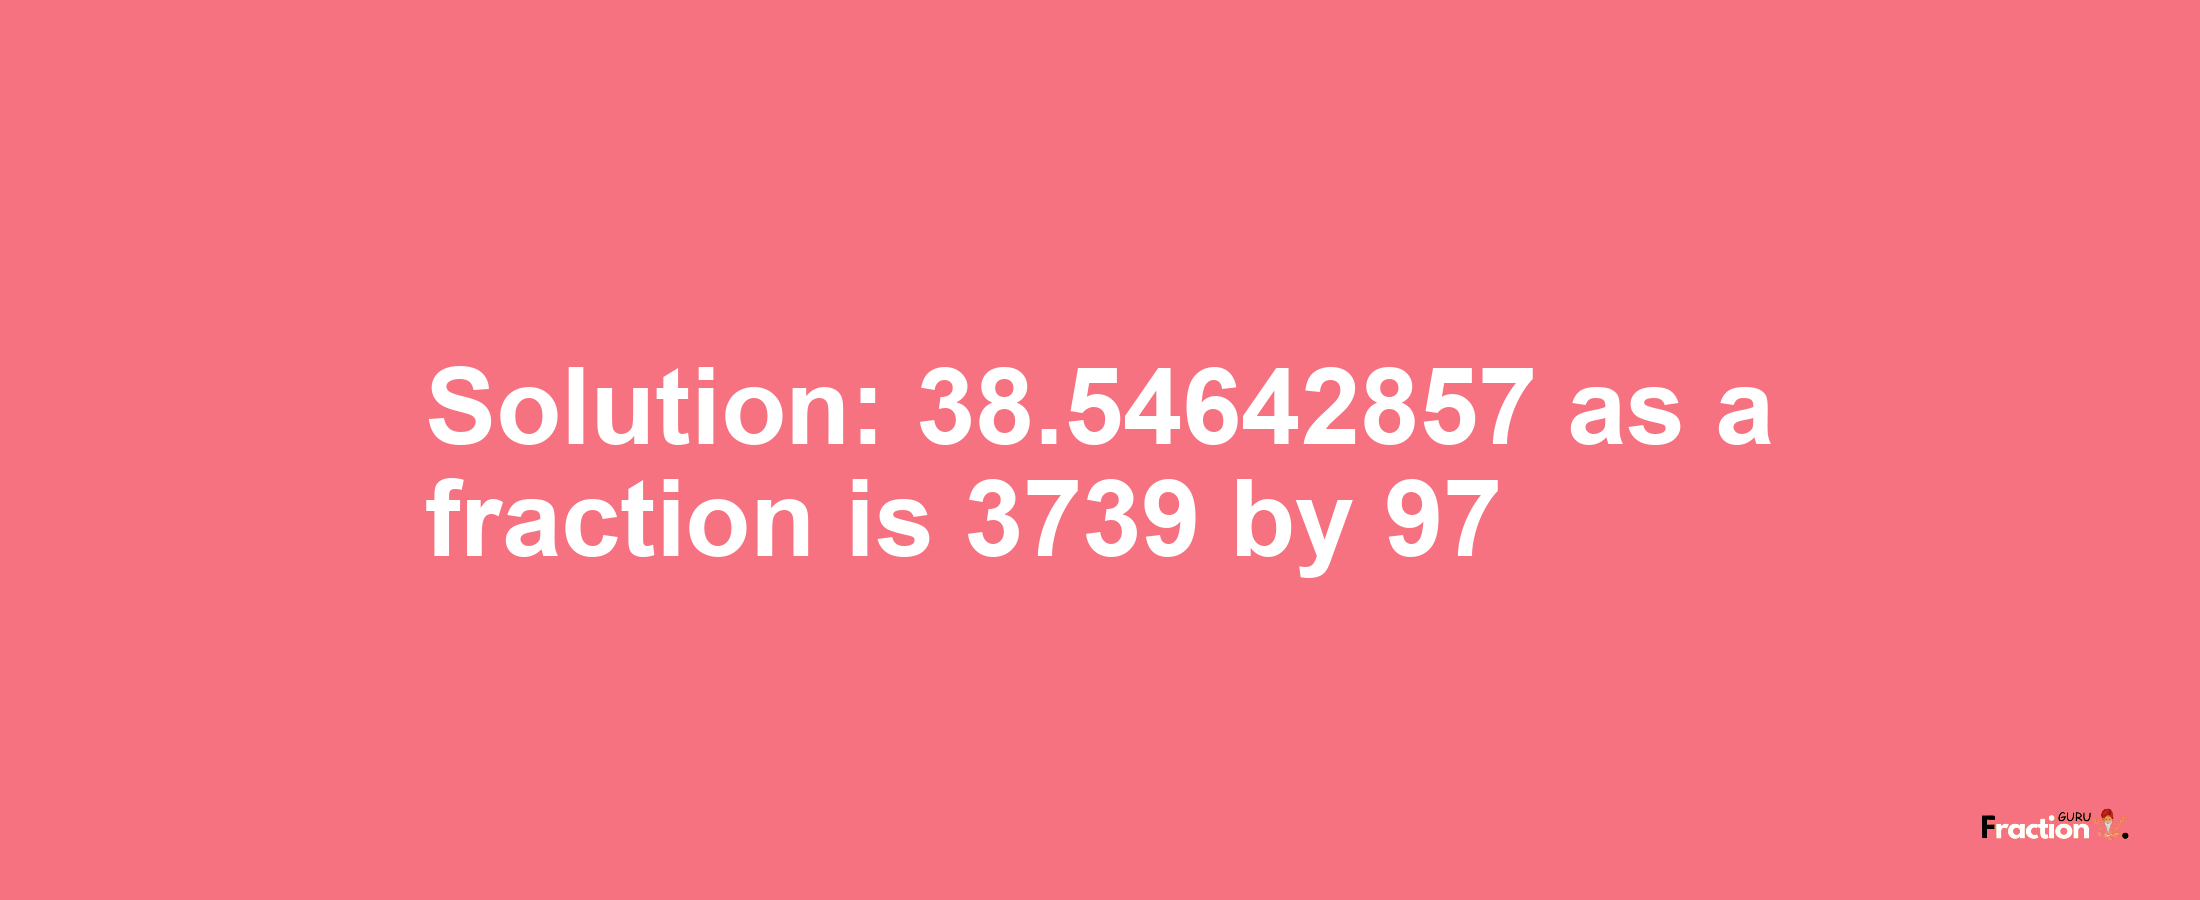 Solution:38.54642857 as a fraction is 3739/97